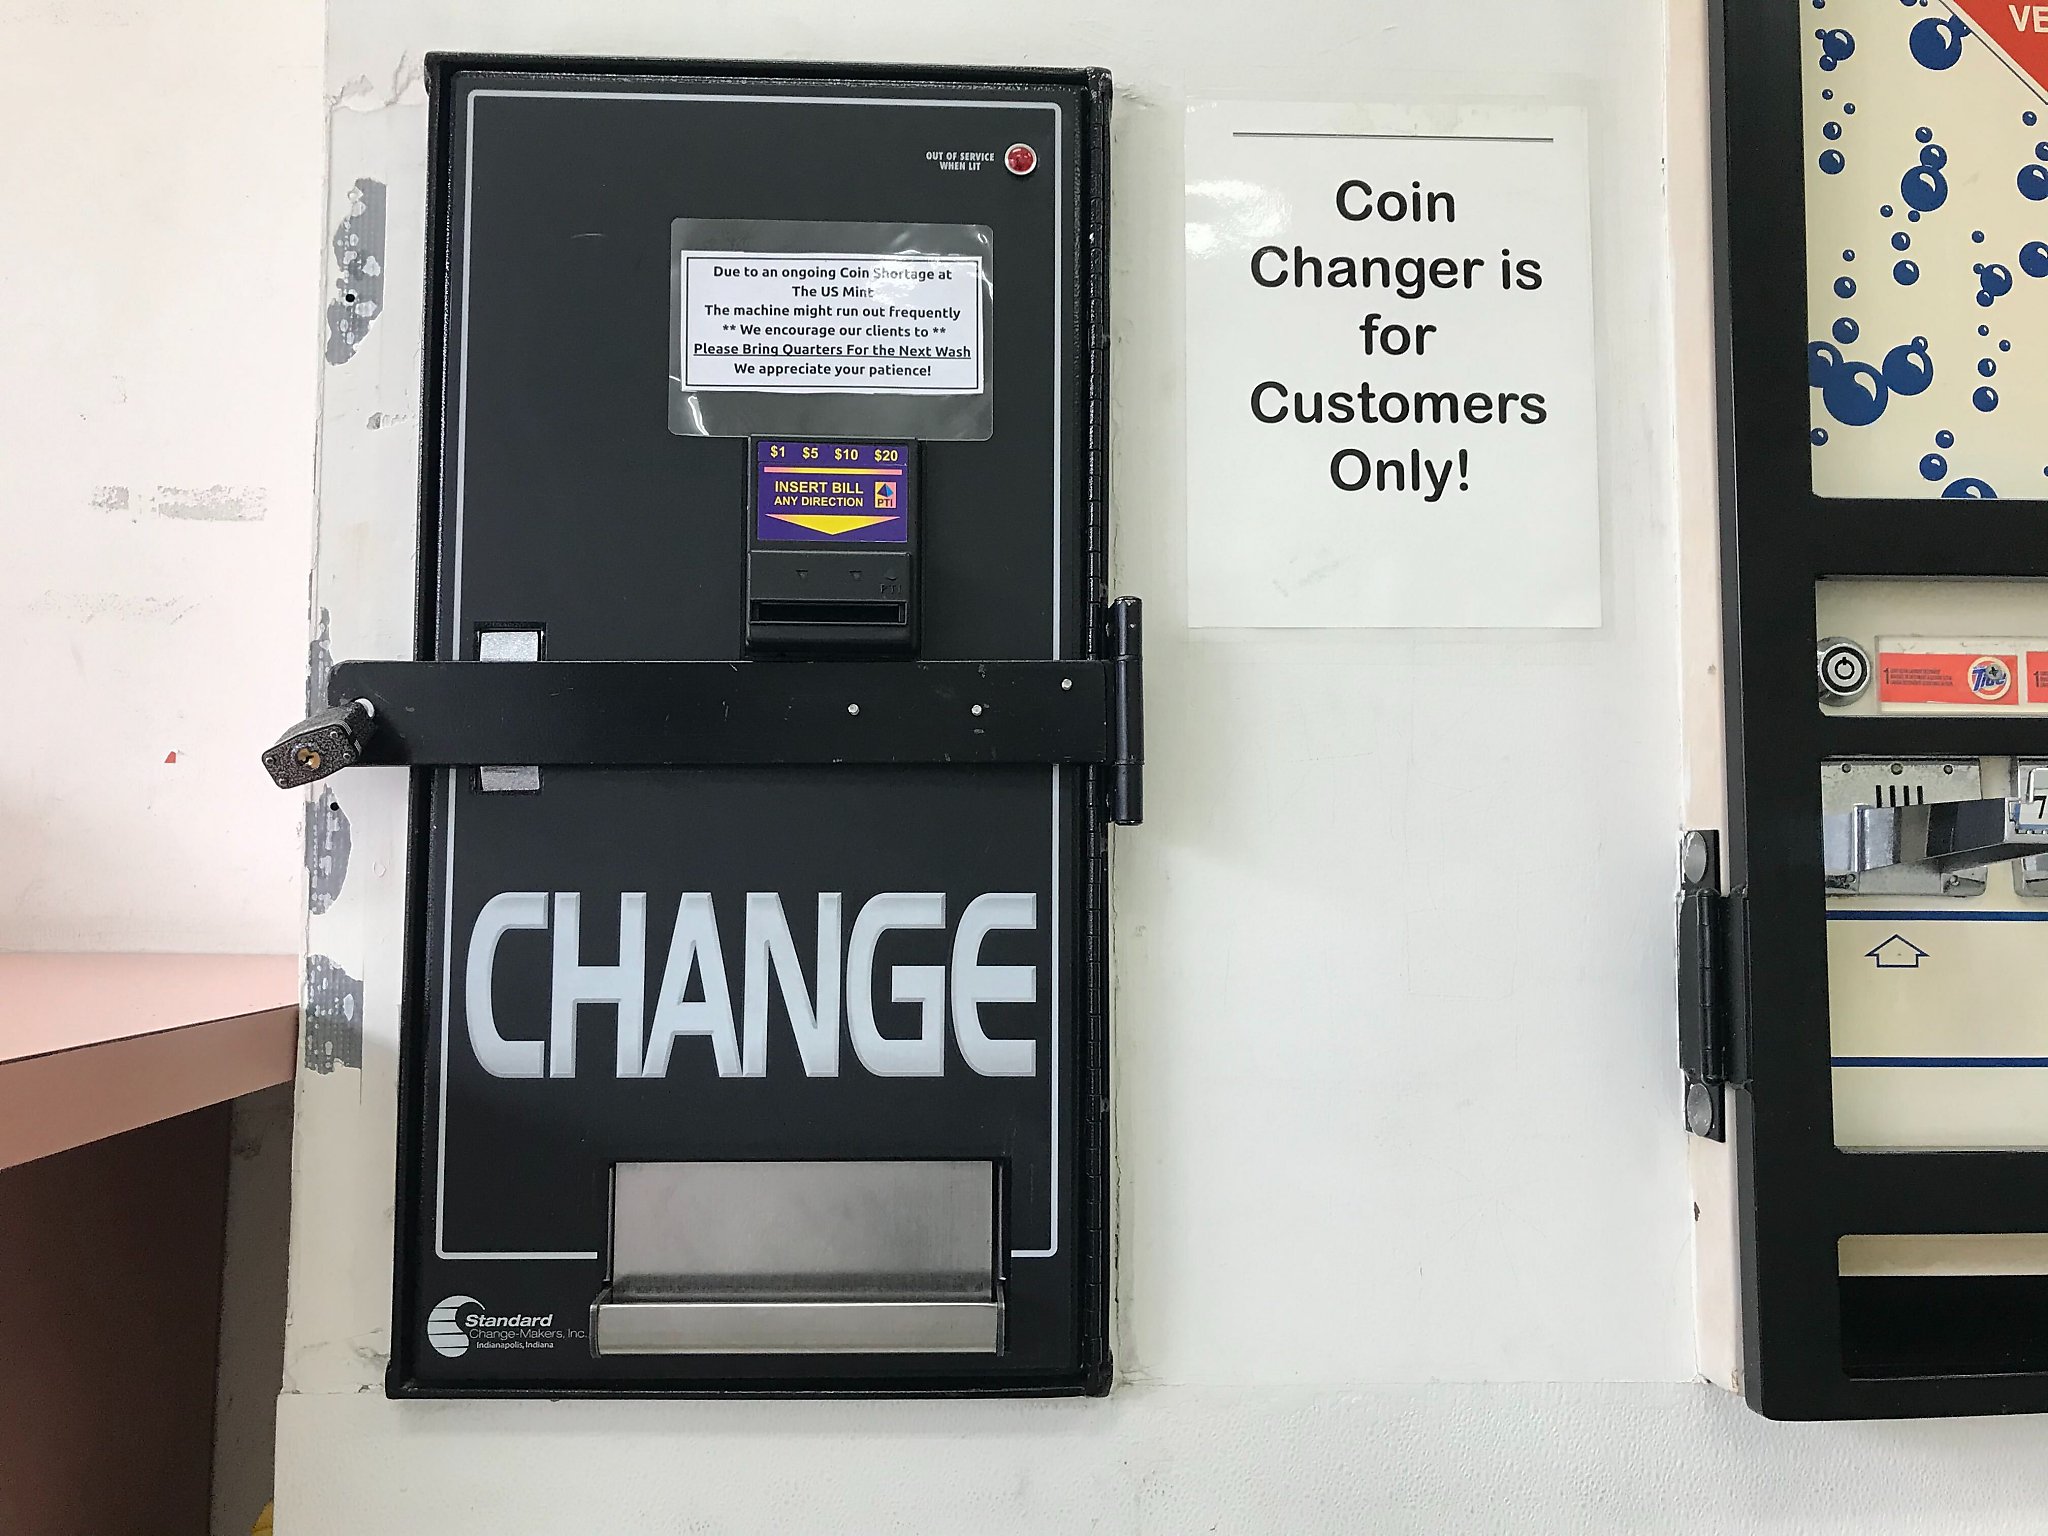 Coin shortage leads to laundry inconveniences for certain students